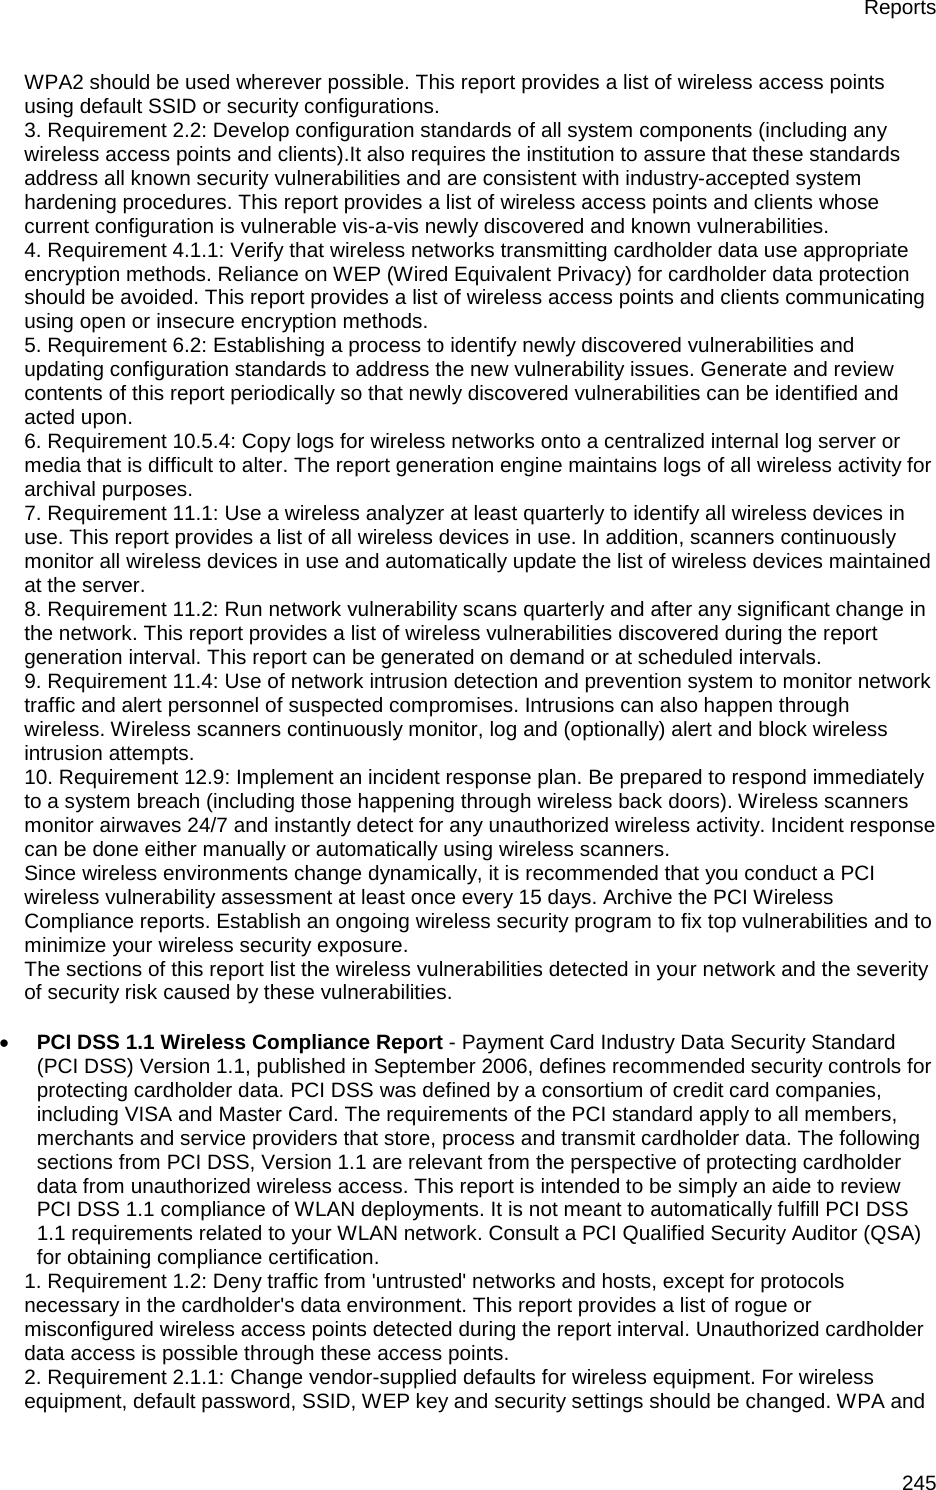 Reports 245 WPA2 should be used wherever possible. This report provides a list of wireless access points using default SSID or security configurations. 3. Requirement 2.2: Develop configuration standards of all system components (including any wireless access points and clients).It also requires the institution to assure that these standards address all known security vulnerabilities and are consistent with industry-accepted system hardening procedures. This report provides a list of wireless access points and clients whose current configuration is vulnerable vis-a-vis newly discovered and known vulnerabilities. 4. Requirement 4.1.1: Verify that wireless networks transmitting cardholder data use appropriate encryption methods. Reliance on WEP (Wired Equivalent Privacy) for cardholder data protection should be avoided. This report provides a list of wireless access points and clients communicating using open or insecure encryption methods. 5. Requirement 6.2: Establishing a process to identify newly discovered vulnerabilities and updating configuration standards to address the new vulnerability issues. Generate and review contents of this report periodically so that newly discovered vulnerabilities can be identified and acted upon. 6. Requirement 10.5.4: Copy logs for wireless networks onto a centralized internal log server or media that is difficult to alter. The report generation engine maintains logs of all wireless activity for archival purposes. 7. Requirement 11.1: Use a wireless analyzer at least quarterly to identify all wireless devices in use. This report provides a list of all wireless devices in use. In addition, scanners continuously monitor all wireless devices in use and automatically update the list of wireless devices maintained at the server. 8. Requirement 11.2: Run network vulnerability scans quarterly and after any significant change in the network. This report provides a list of wireless vulnerabilities discovered during the report generation interval. This report can be generated on demand or at scheduled intervals. 9. Requirement 11.4: Use of network intrusion detection and prevention system to monitor network traffic and alert personnel of suspected compromises. Intrusions can also happen through wireless. Wireless scanners continuously monitor, log and (optionally) alert and block wireless intrusion attempts. 10. Requirement 12.9: Implement an incident response plan. Be prepared to respond immediately to a system breach (including those happening through wireless back doors). Wireless scanners monitor airwaves 24/7 and instantly detect for any unauthorized wireless activity. Incident response can be done either manually or automatically using wireless scanners. Since wireless environments change dynamically, it is recommended that you conduct a PCI wireless vulnerability assessment at least once every 15 days. Archive the PCI Wireless Compliance reports. Establish an ongoing wireless security program to fix top vulnerabilities and to minimize your wireless security exposure. The sections of this report list the wireless vulnerabilities detected in your network and the severity of security risk caused by these vulnerabilities.   • PCI DSS 1.1 Wireless Compliance Report - Payment Card Industry Data Security Standard (PCI DSS) Version 1.1, published in September 2006, defines recommended security controls for protecting cardholder data. PCI DSS was defined by a consortium of credit card companies, including VISA and Master Card. The requirements of the PCI standard apply to all members, merchants and service providers that store, process and transmit cardholder data. The following sections from PCI DSS, Version 1.1 are relevant from the perspective of protecting cardholder data from unauthorized wireless access. This report is intended to be simply an aide to review PCI DSS 1.1 compliance of WLAN deployments. It is not meant to automatically fulfill PCI DSS 1.1 requirements related to your WLAN network. Consult a PCI Qualified Security Auditor (QSA) for obtaining compliance certification. 1. Requirement 1.2: Deny traffic from &apos;untrusted&apos; networks and hosts, except for protocols necessary in the cardholder&apos;s data environment. This report provides a list of rogue or misconfigured wireless access points detected during the report interval. Unauthorized cardholder data access is possible through these access points. 2. Requirement 2.1.1: Change vendor-supplied defaults for wireless equipment. For wireless equipment, default password, SSID, WEP key and security settings should be changed. WPA and 